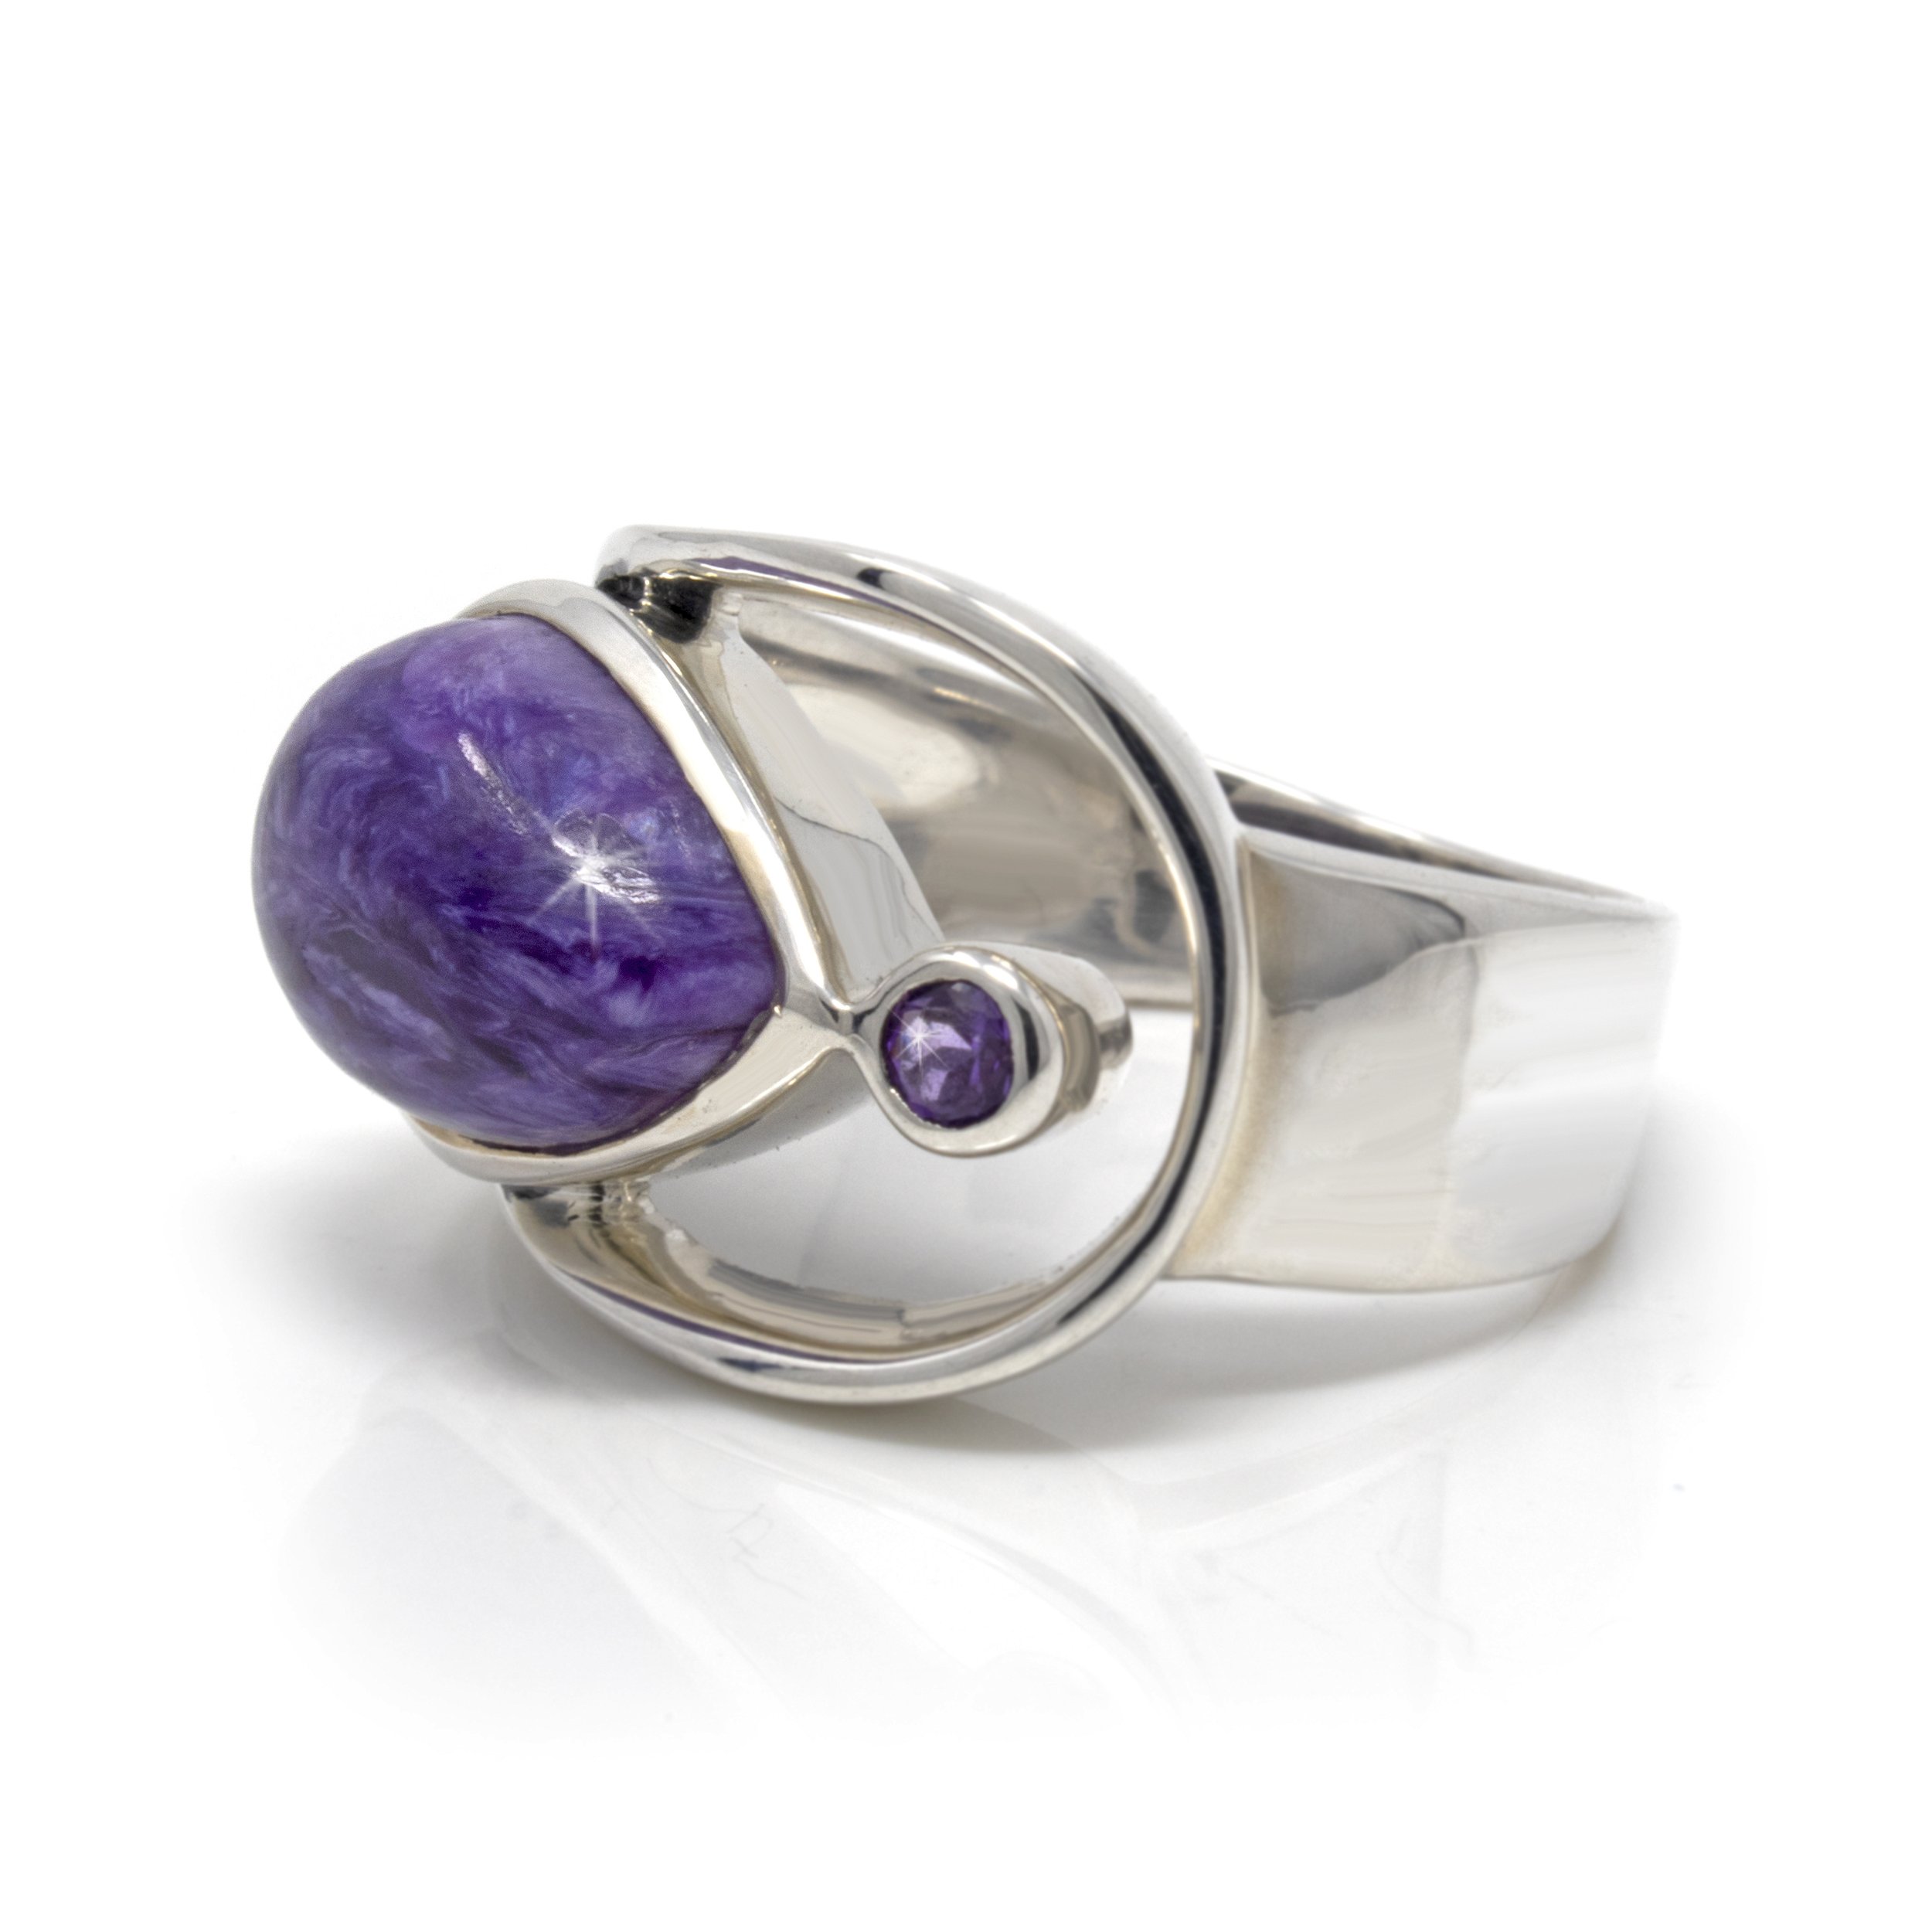 Charoite Ring Size 9 - Pear Cabochon With Faceted Amethyst Round & Silver Bezels Set On Open Band Top